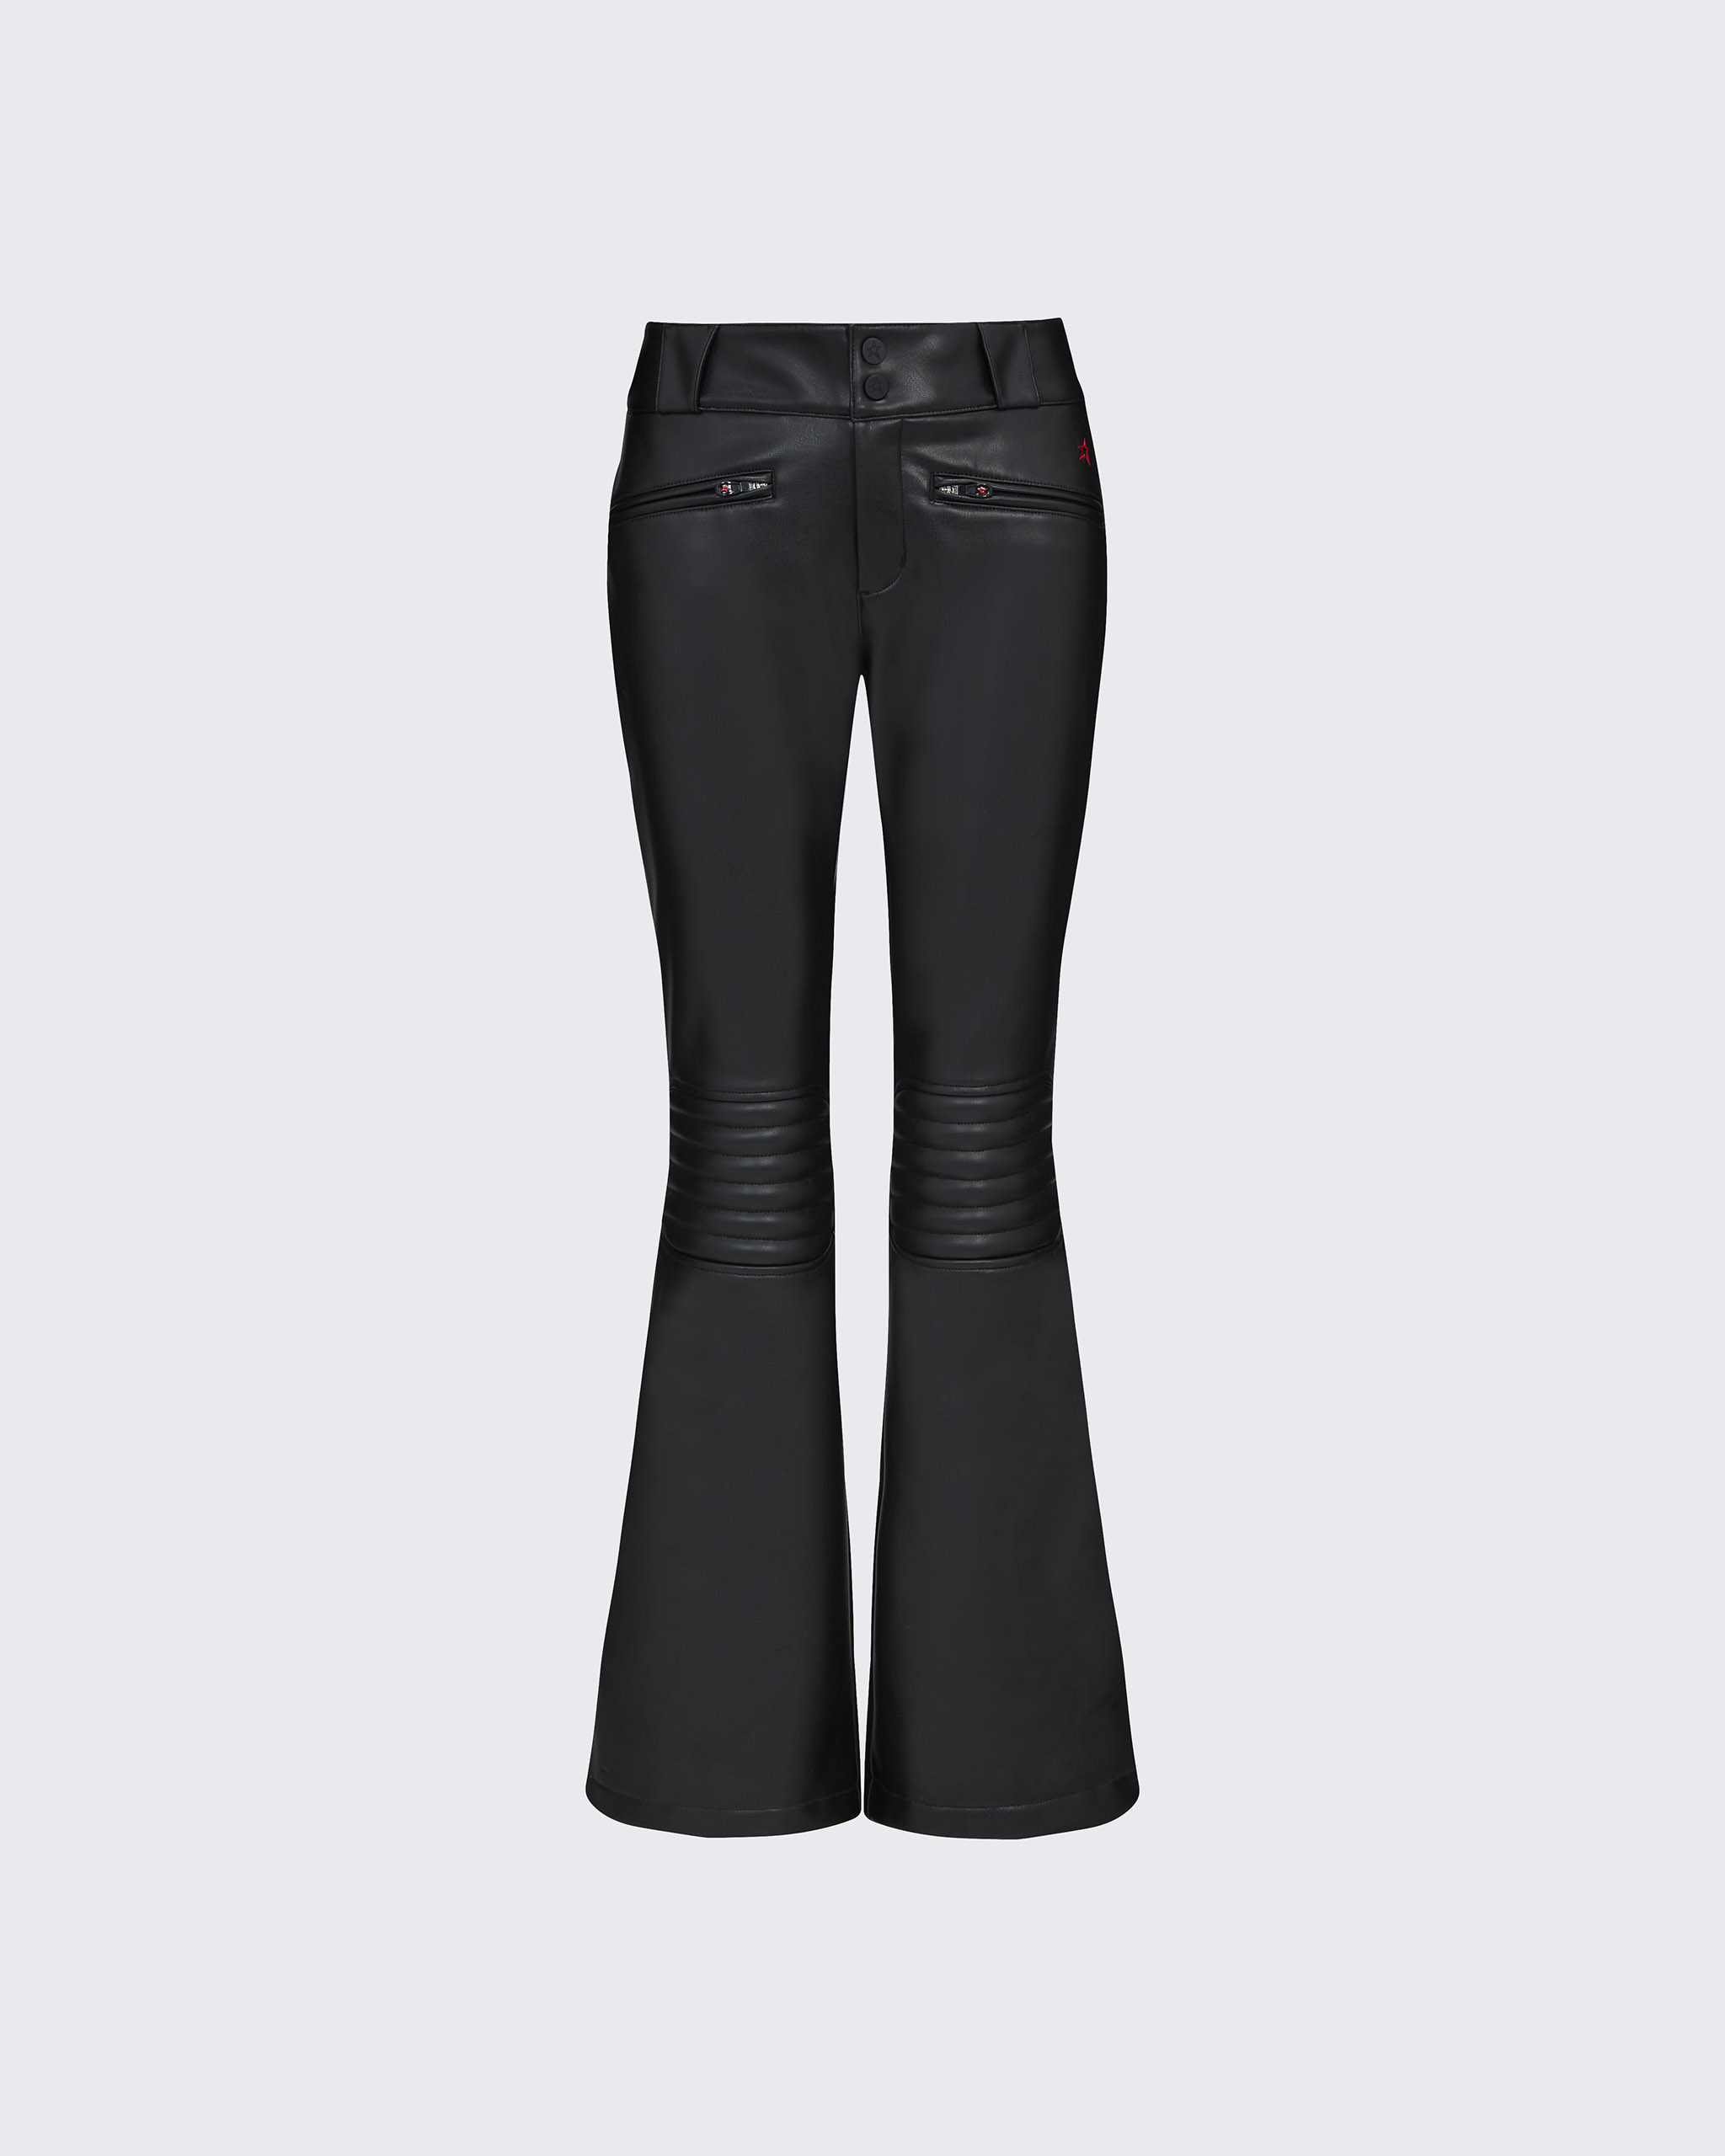 Black Leather Pants for Women, Black PU Leather Pants for Women, Leather  Flared Pants for Women, Artificial Leather Pants for Women -  Finland